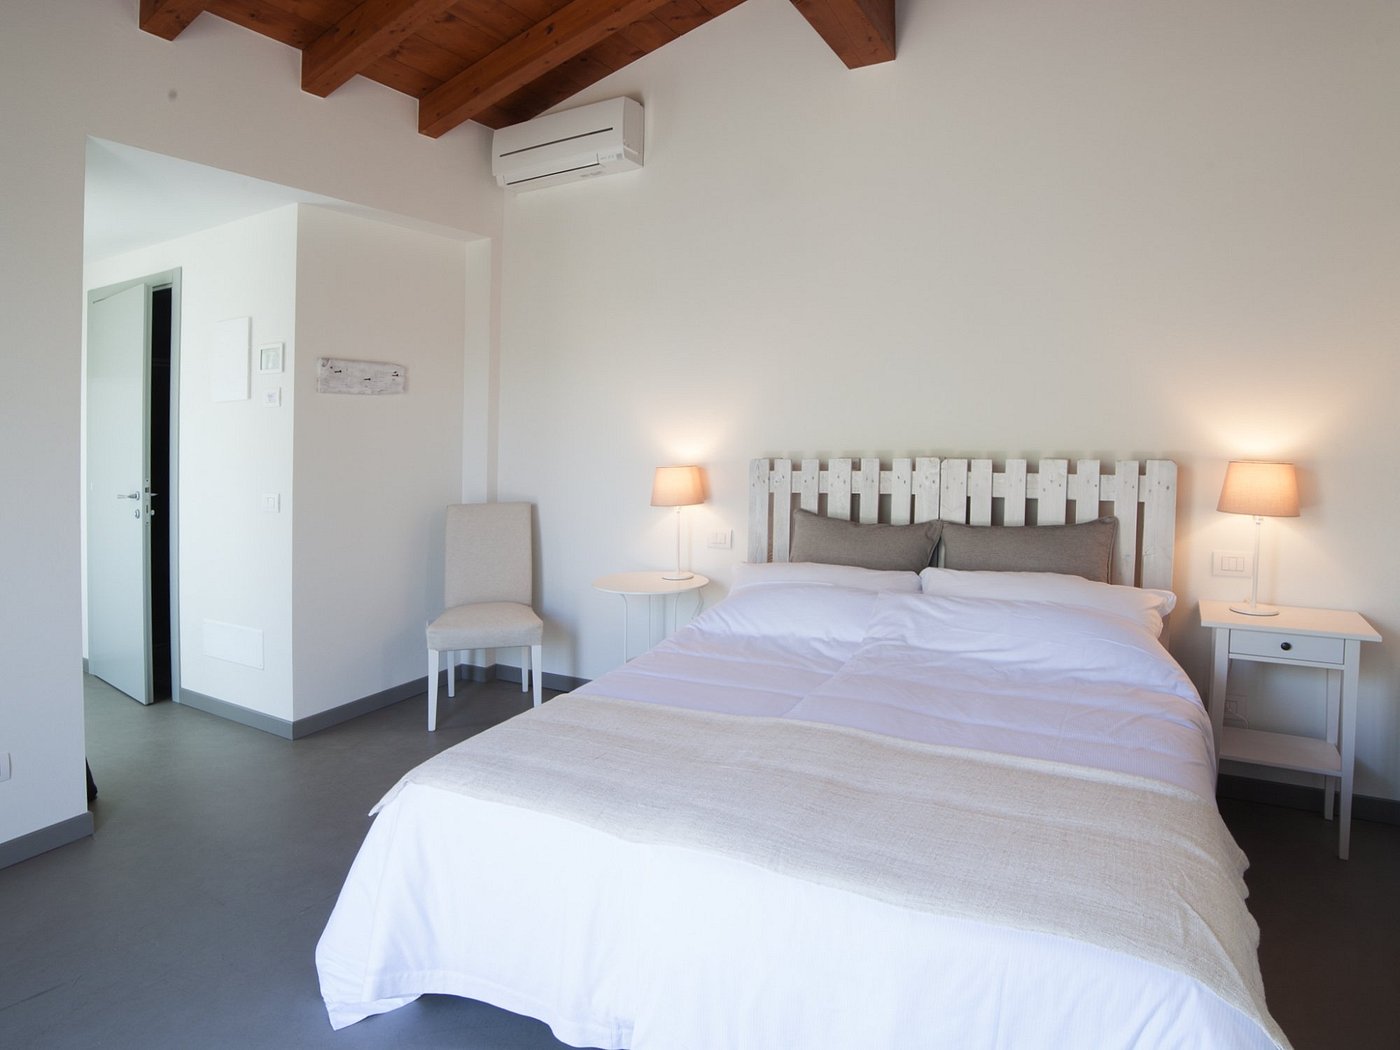 CORTE MANTOVANI - Prices & Guest house Reviews (Italy/Cola)